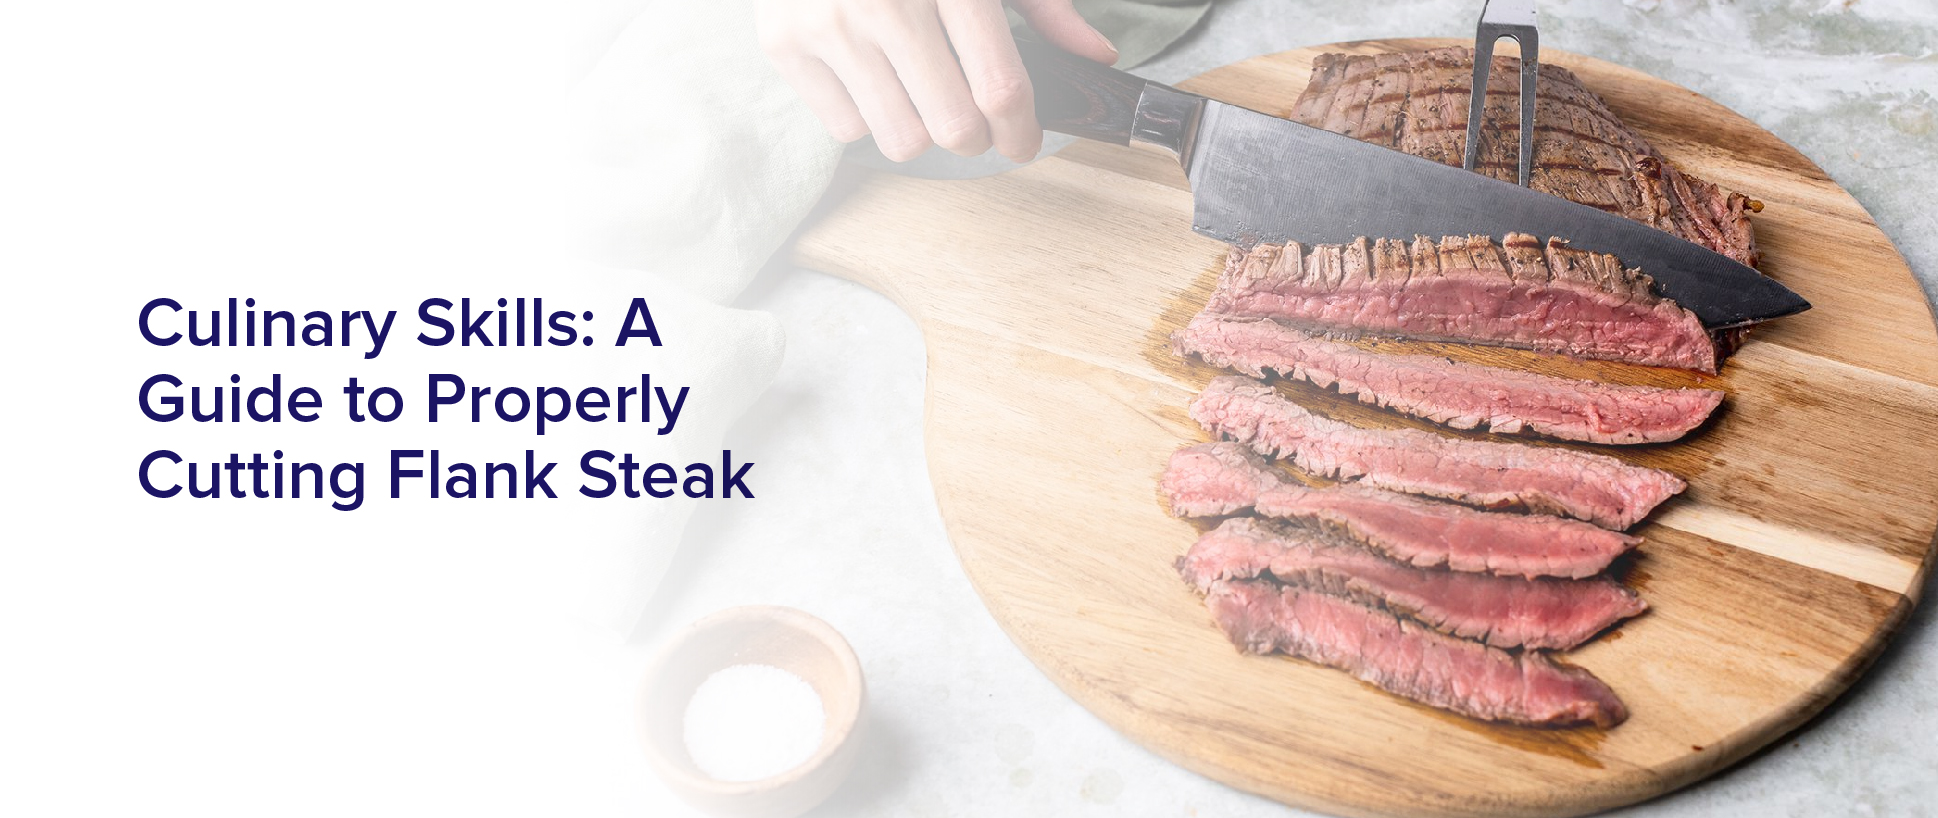 Culinary Skills: A Guide To Properly Cutting Flank Steak"